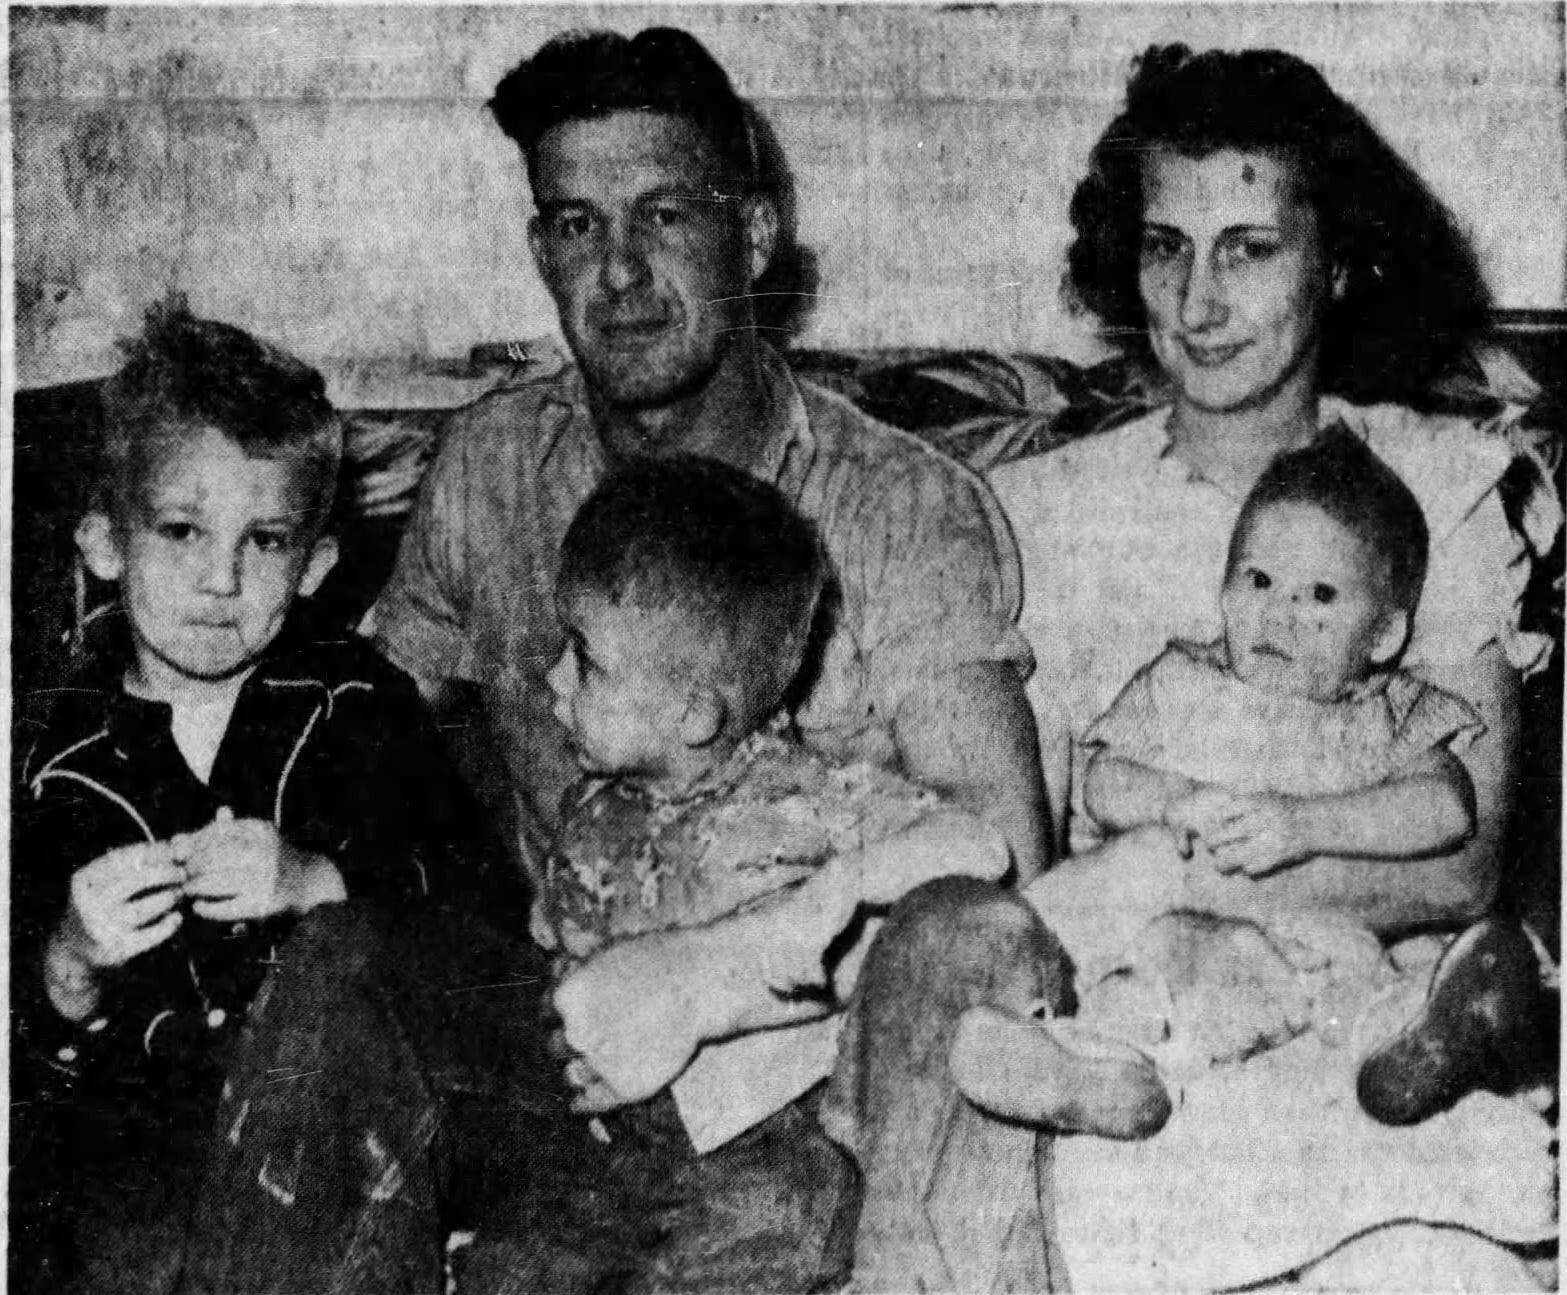 Marine Cpl. Harold "Pie" Keller poses with his family in 1950. The Marines revealed Keller was one of six Marines depicted in the famous photo of raising a flag on Iwo Jima, correcting a 74-year-old error.